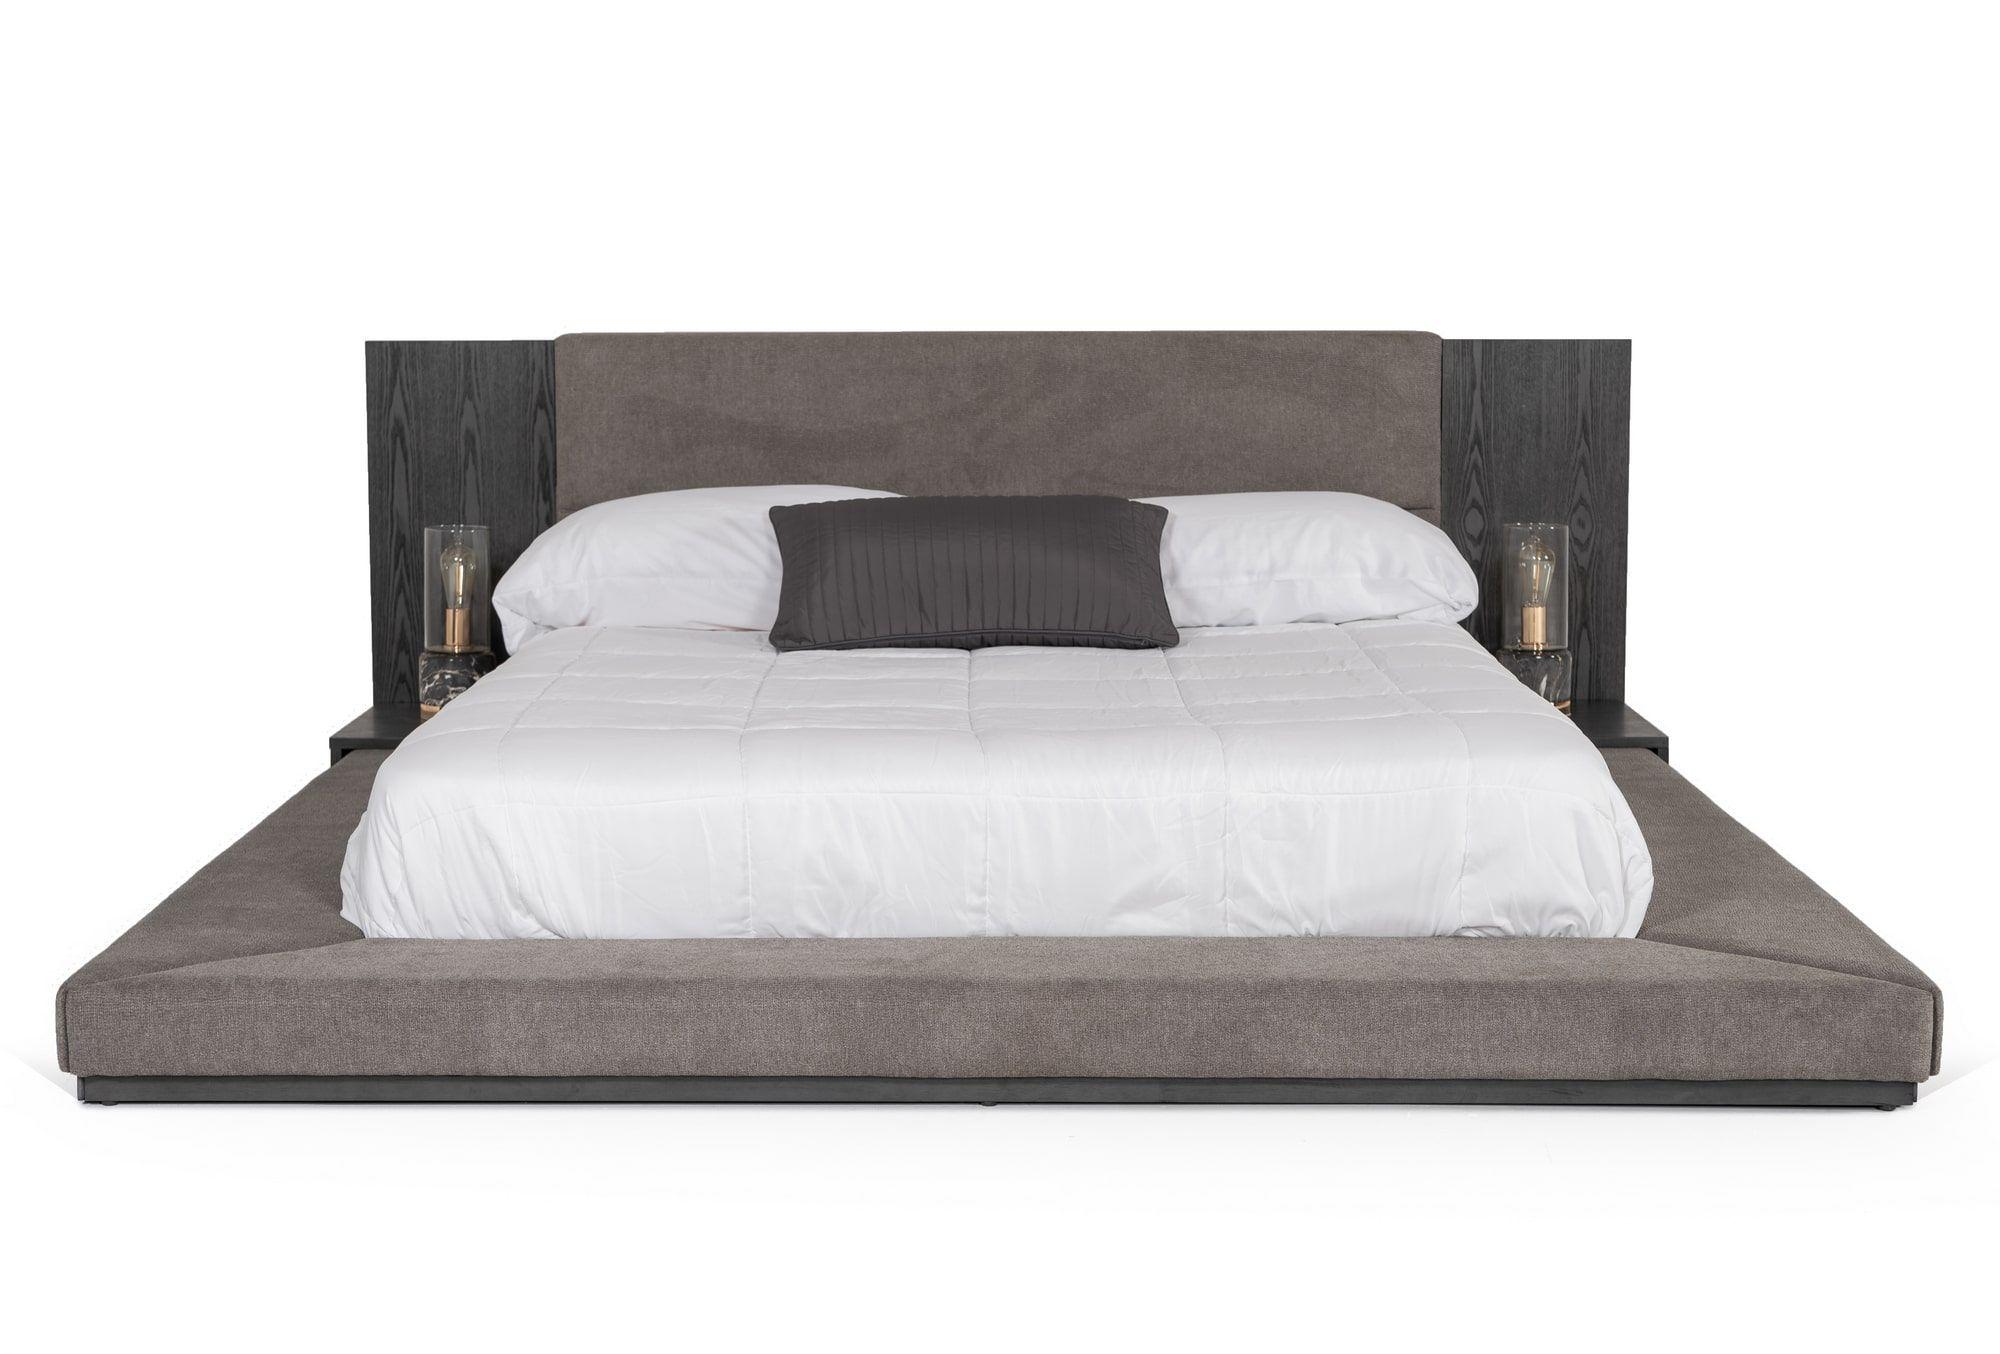 Contemporary, Modern Platform Bedroom Set Jagger VGMABR-55-GRY-BED in Gray Fabric